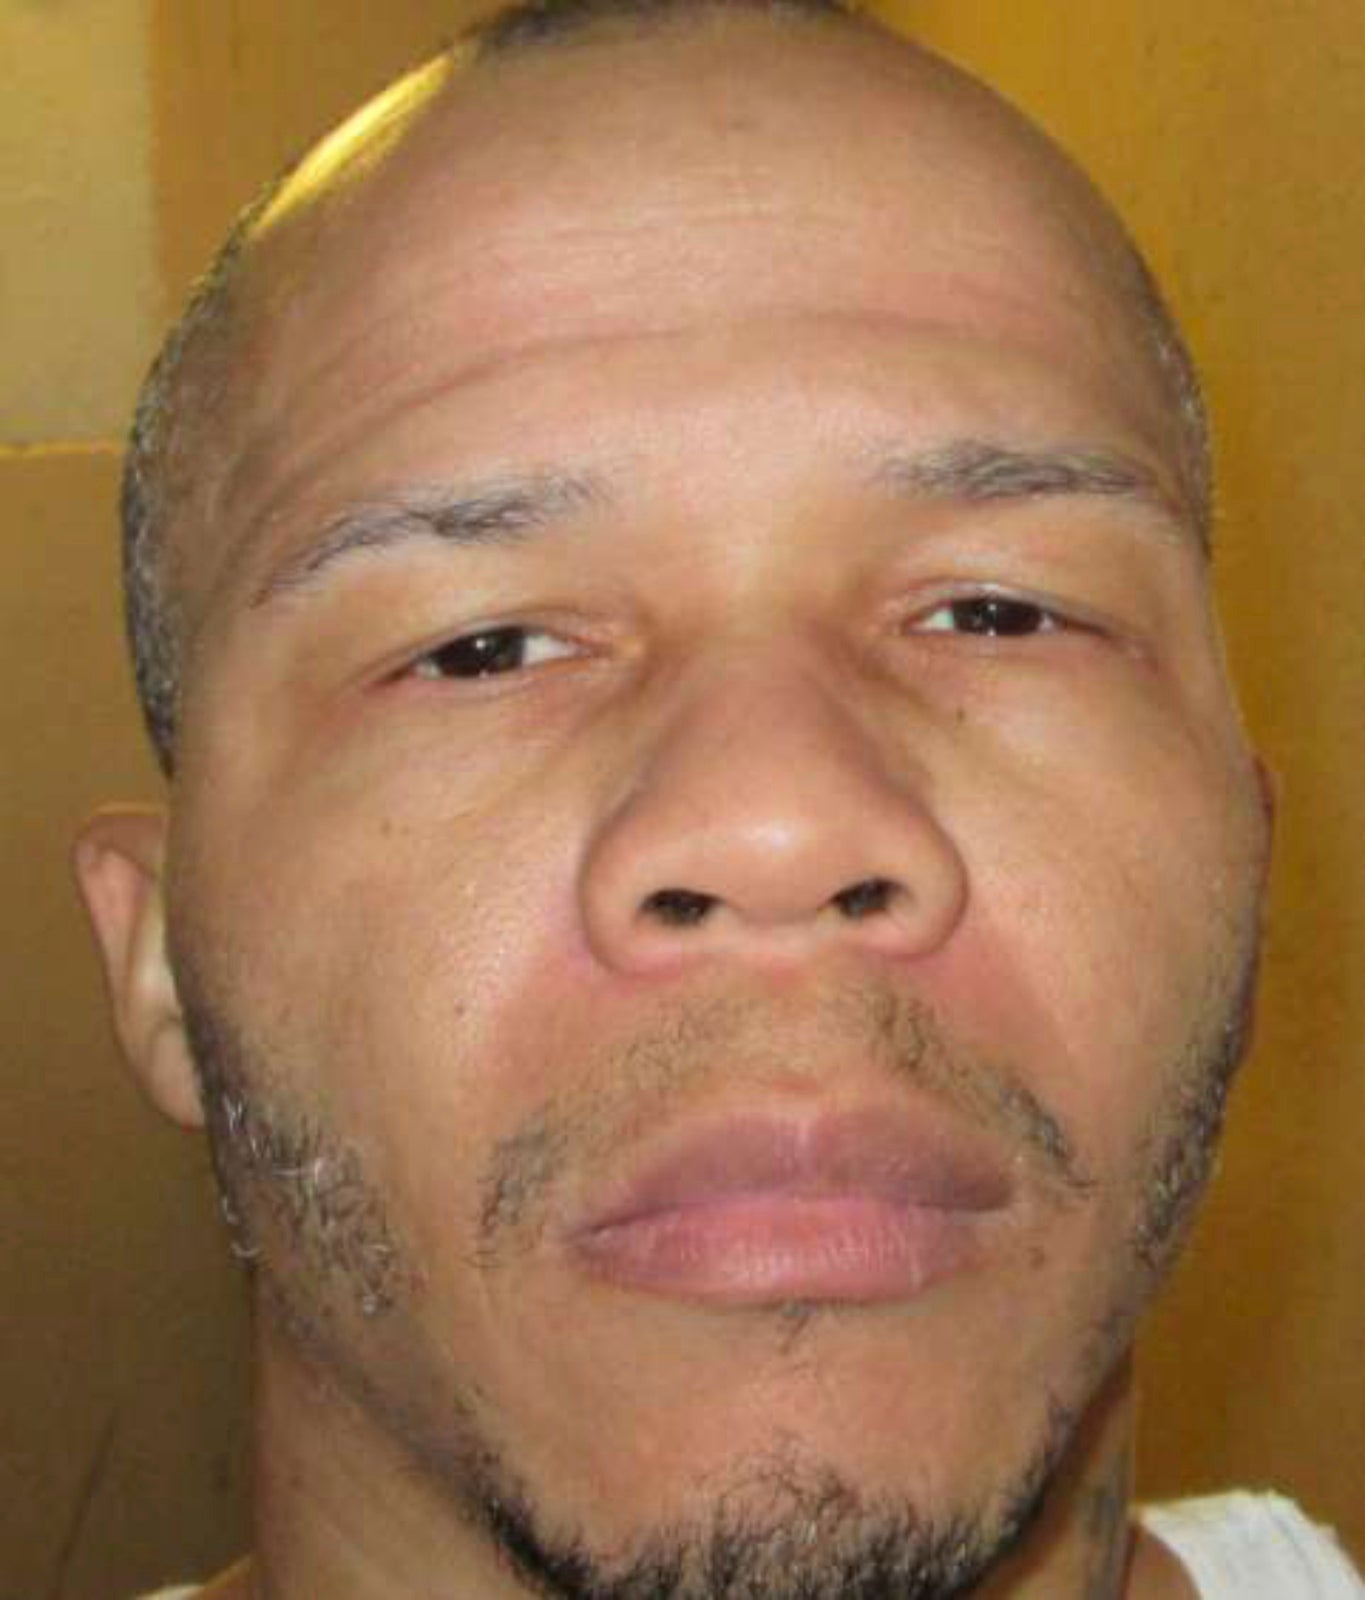 Supreme Court considers Alabama's bid to allow execution The Independent